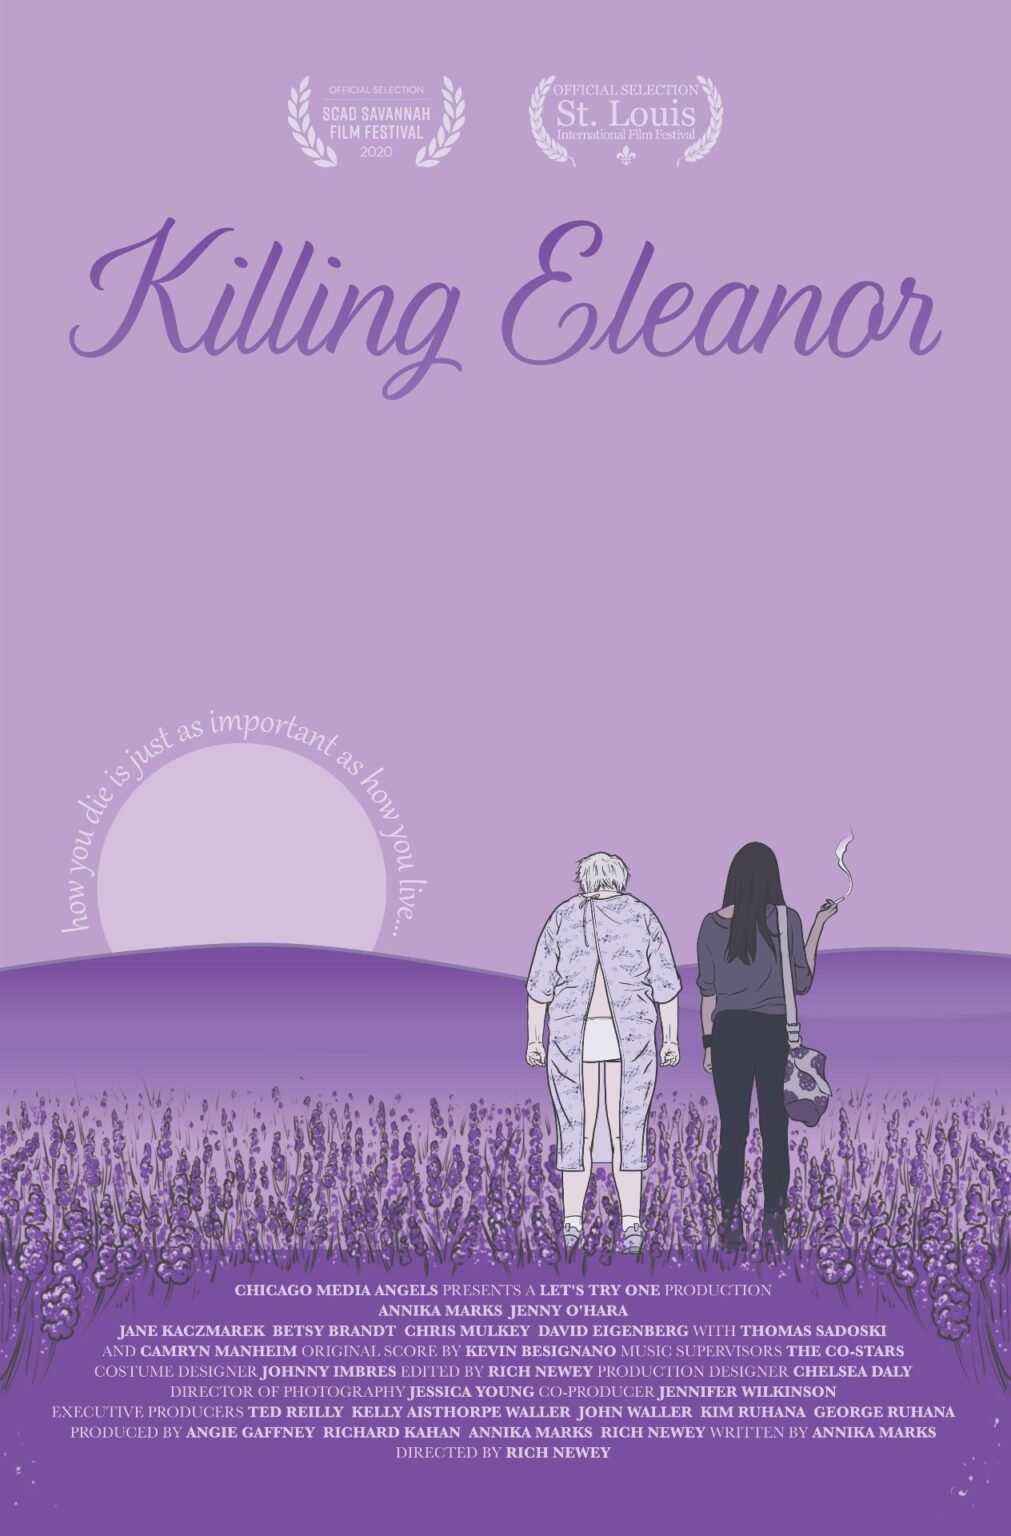 'Killing Eleanor' is the new film by director Rich Newey. We got a chance to interview Newey about the film and female representation.